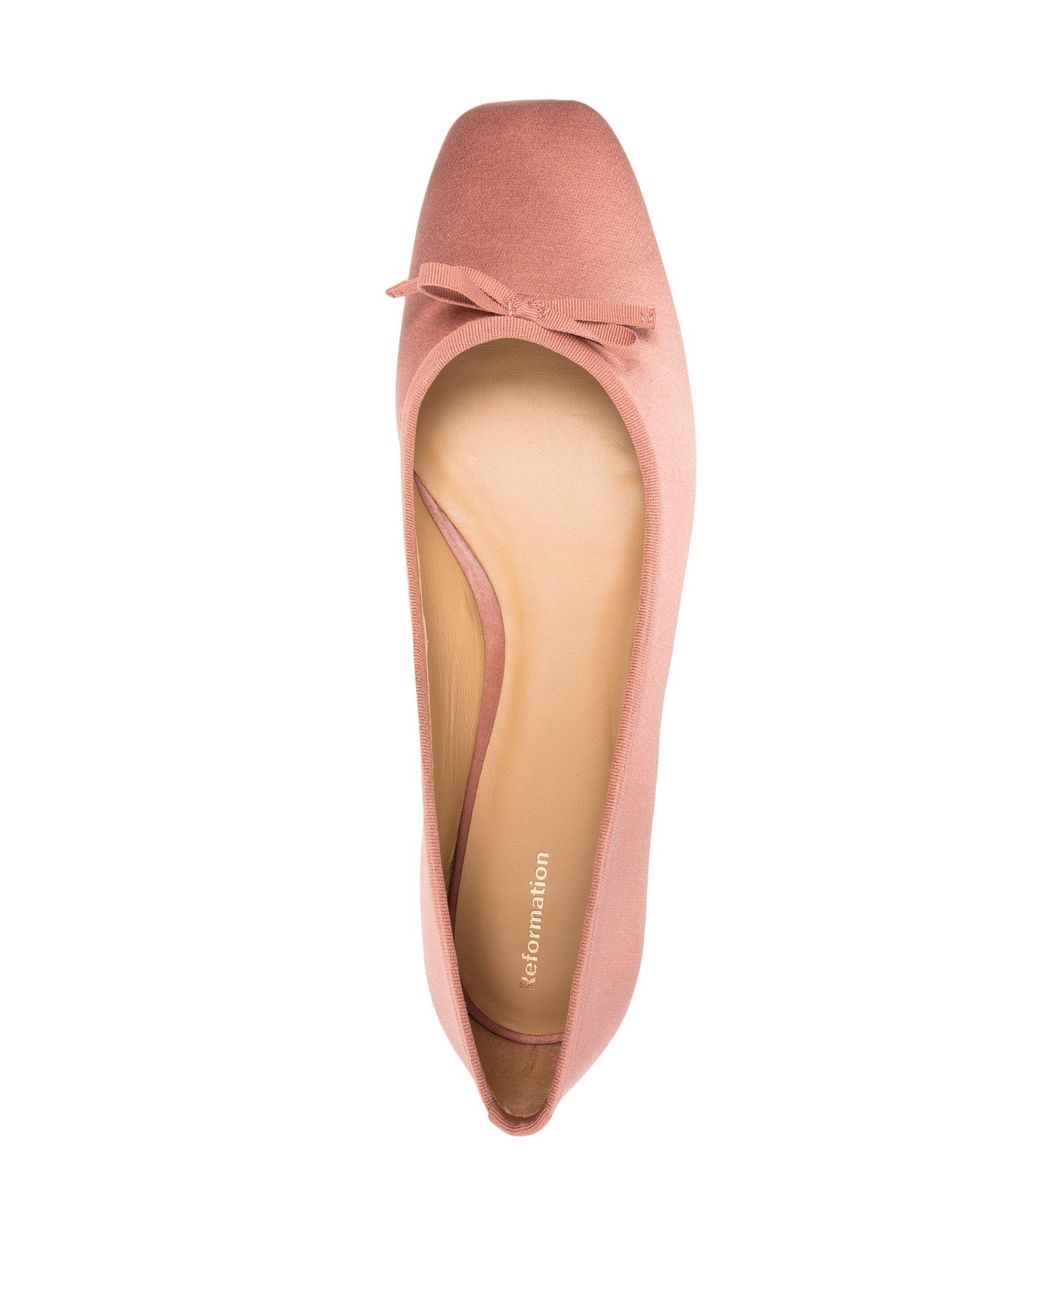 Reformation Paola Satin Ballerina Shoes - Women's - Fabric/calf Leather in  Pink | Lyst